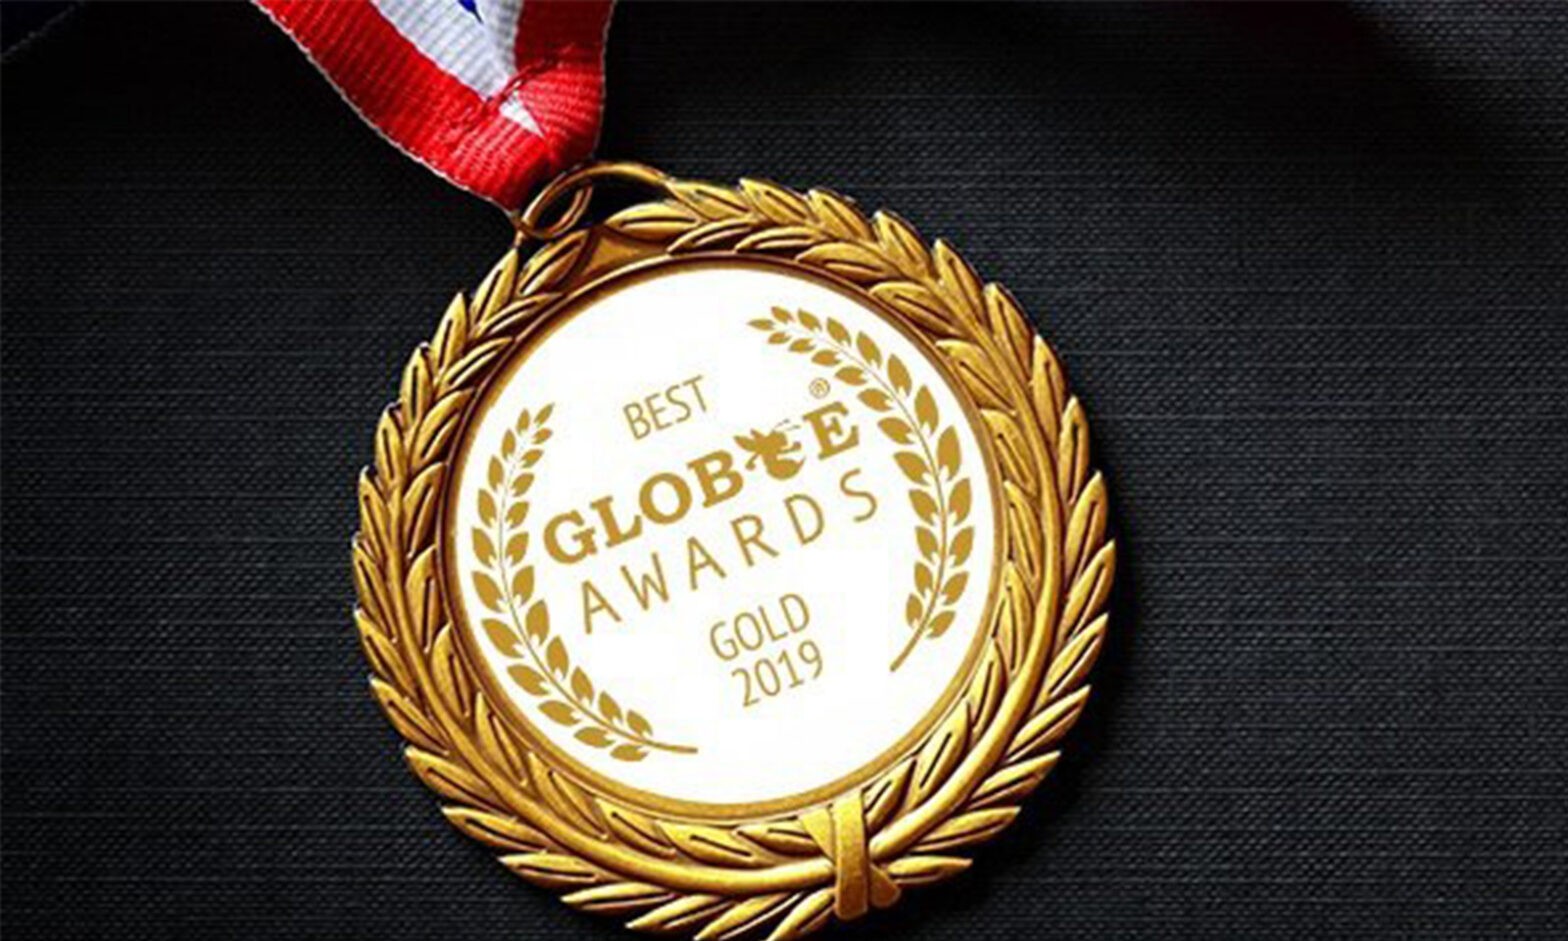 Featured image for post: V DIGITAL SERVICES IS GOLDEN IN THE GLOBEES